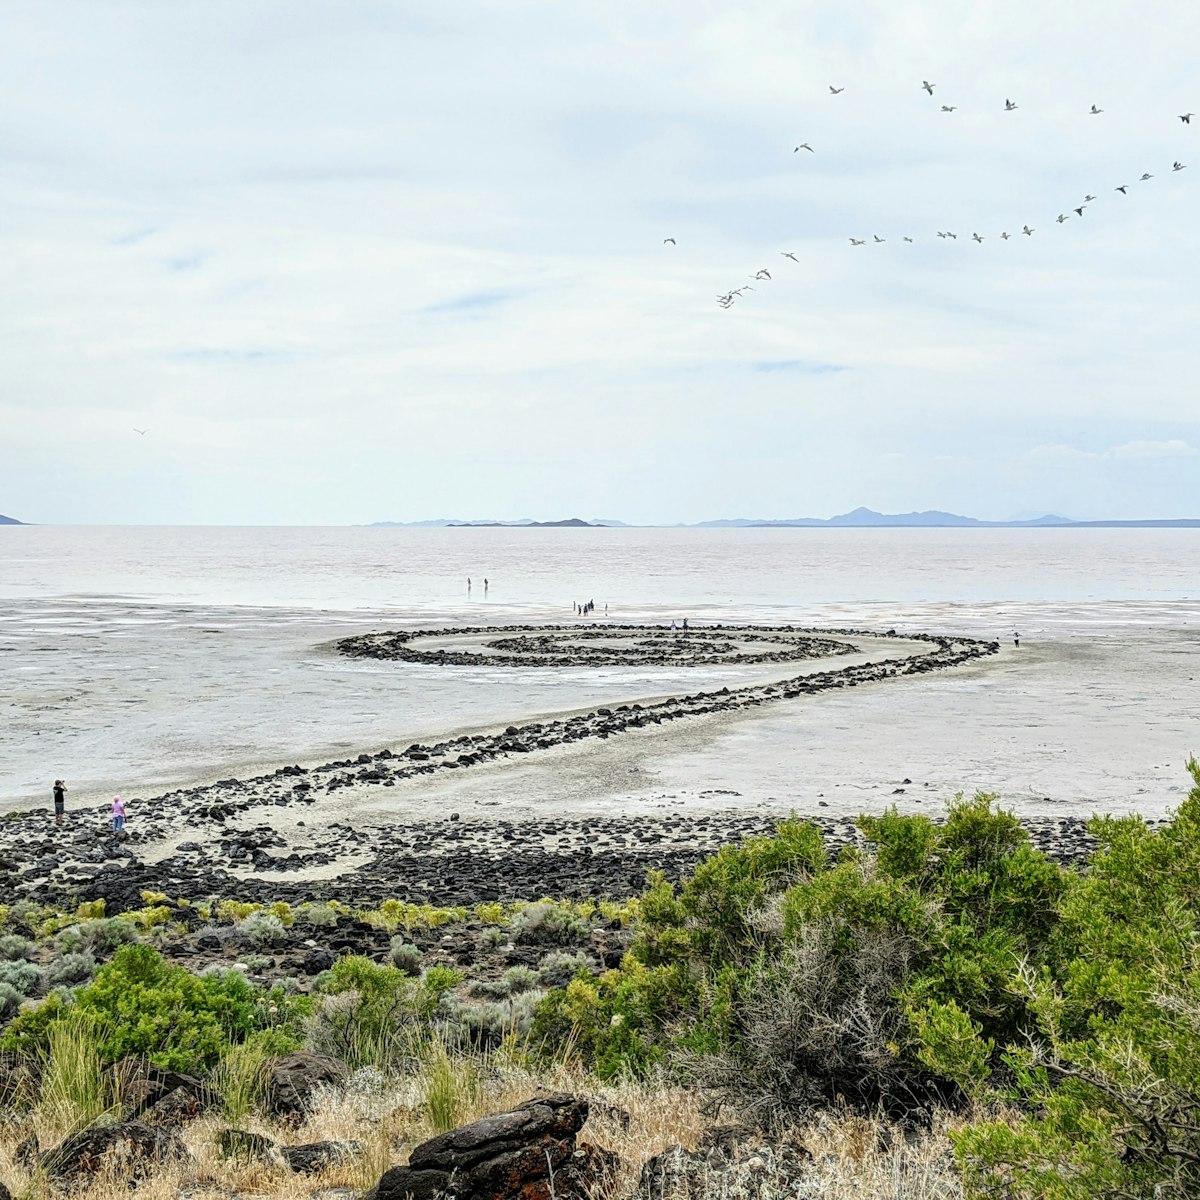 Spiral Jetty in the smmer with views of the Great Salt Lake.